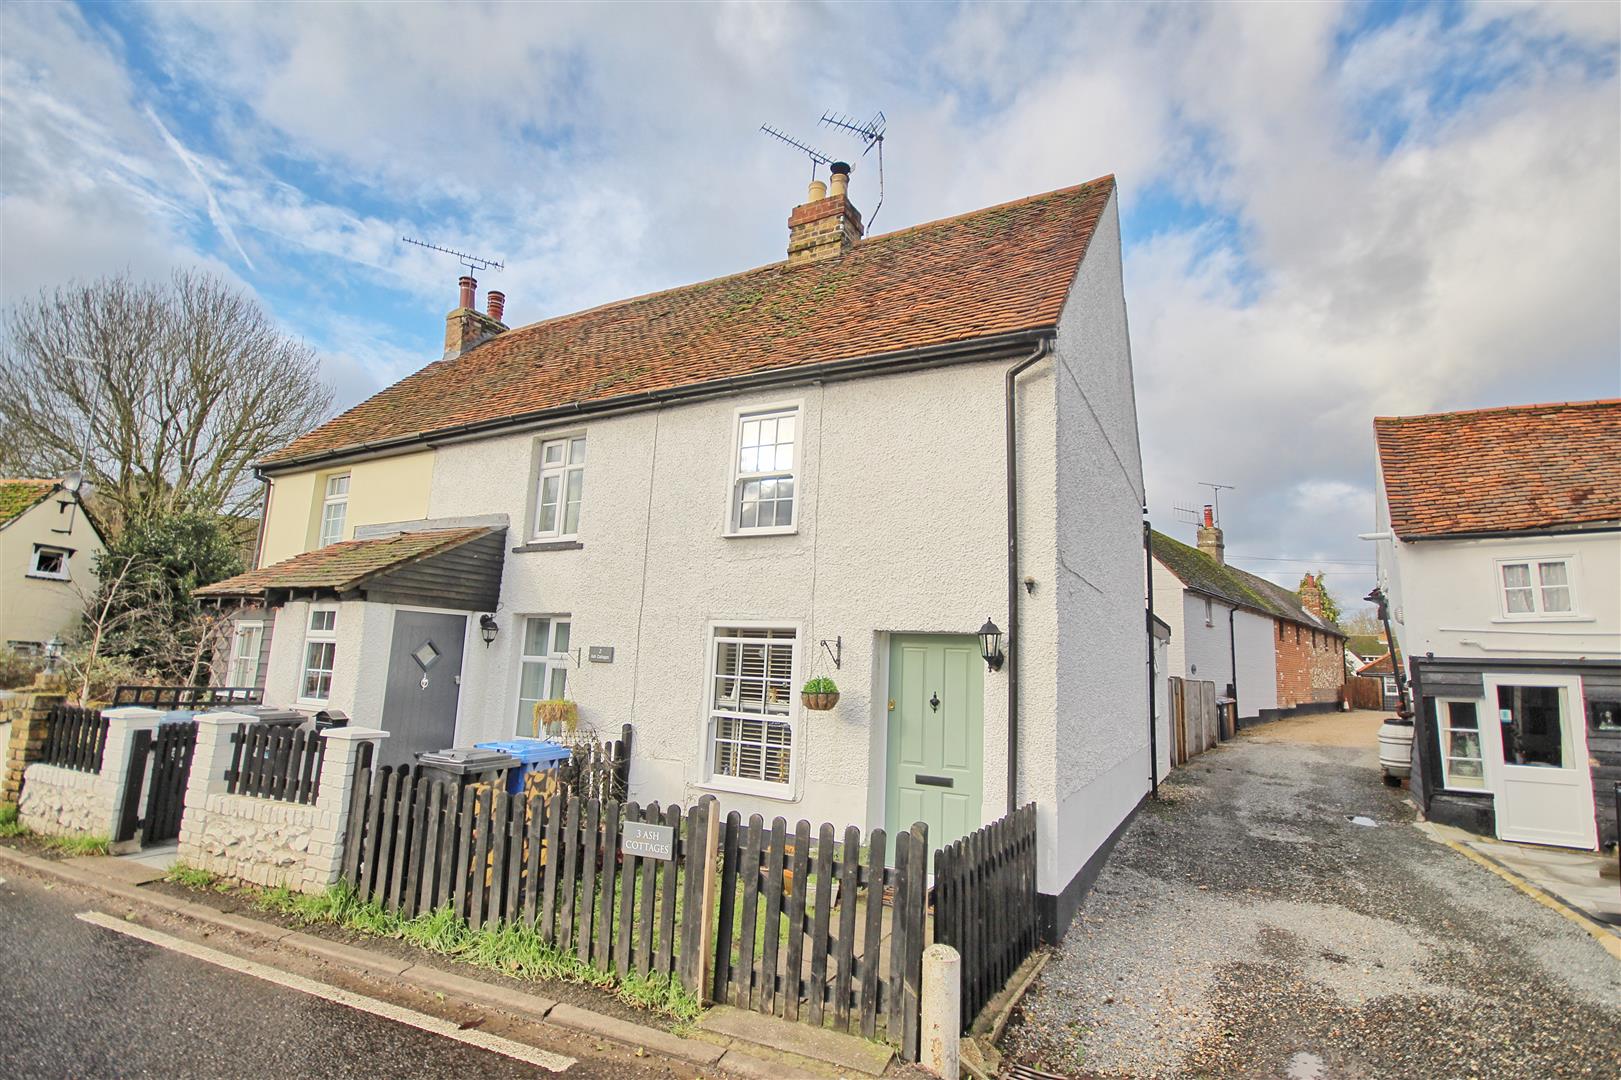 WARESIDE, WARE - LOVELY PERIOD COTTAGE